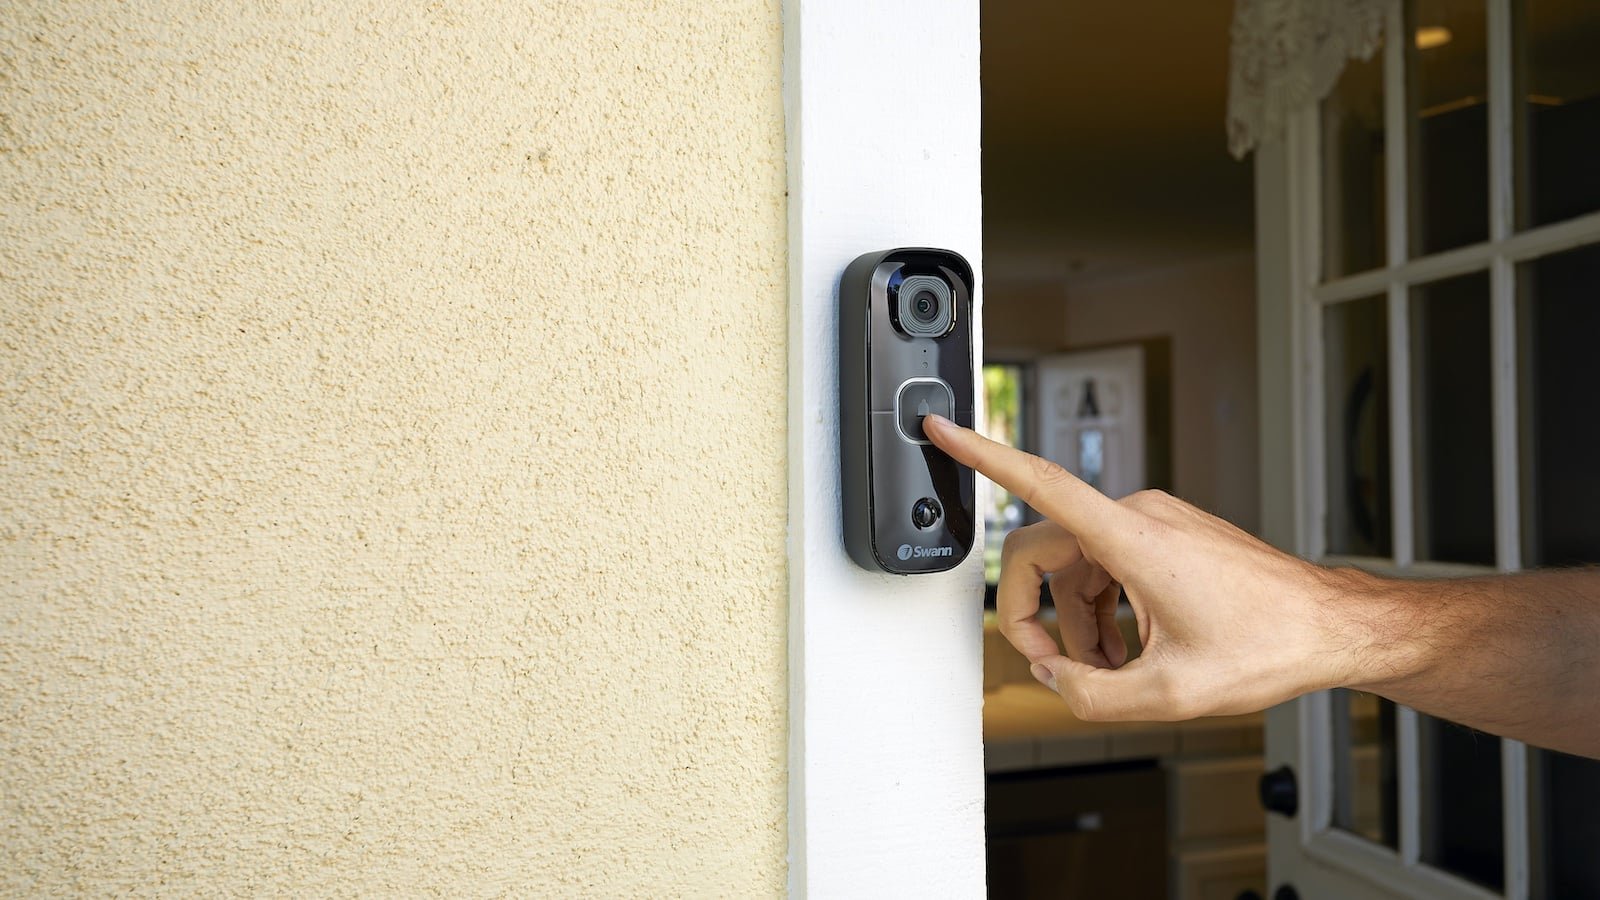 SwannBuddy Smart Wireless Video Doorbell senses heat, motion and people for security